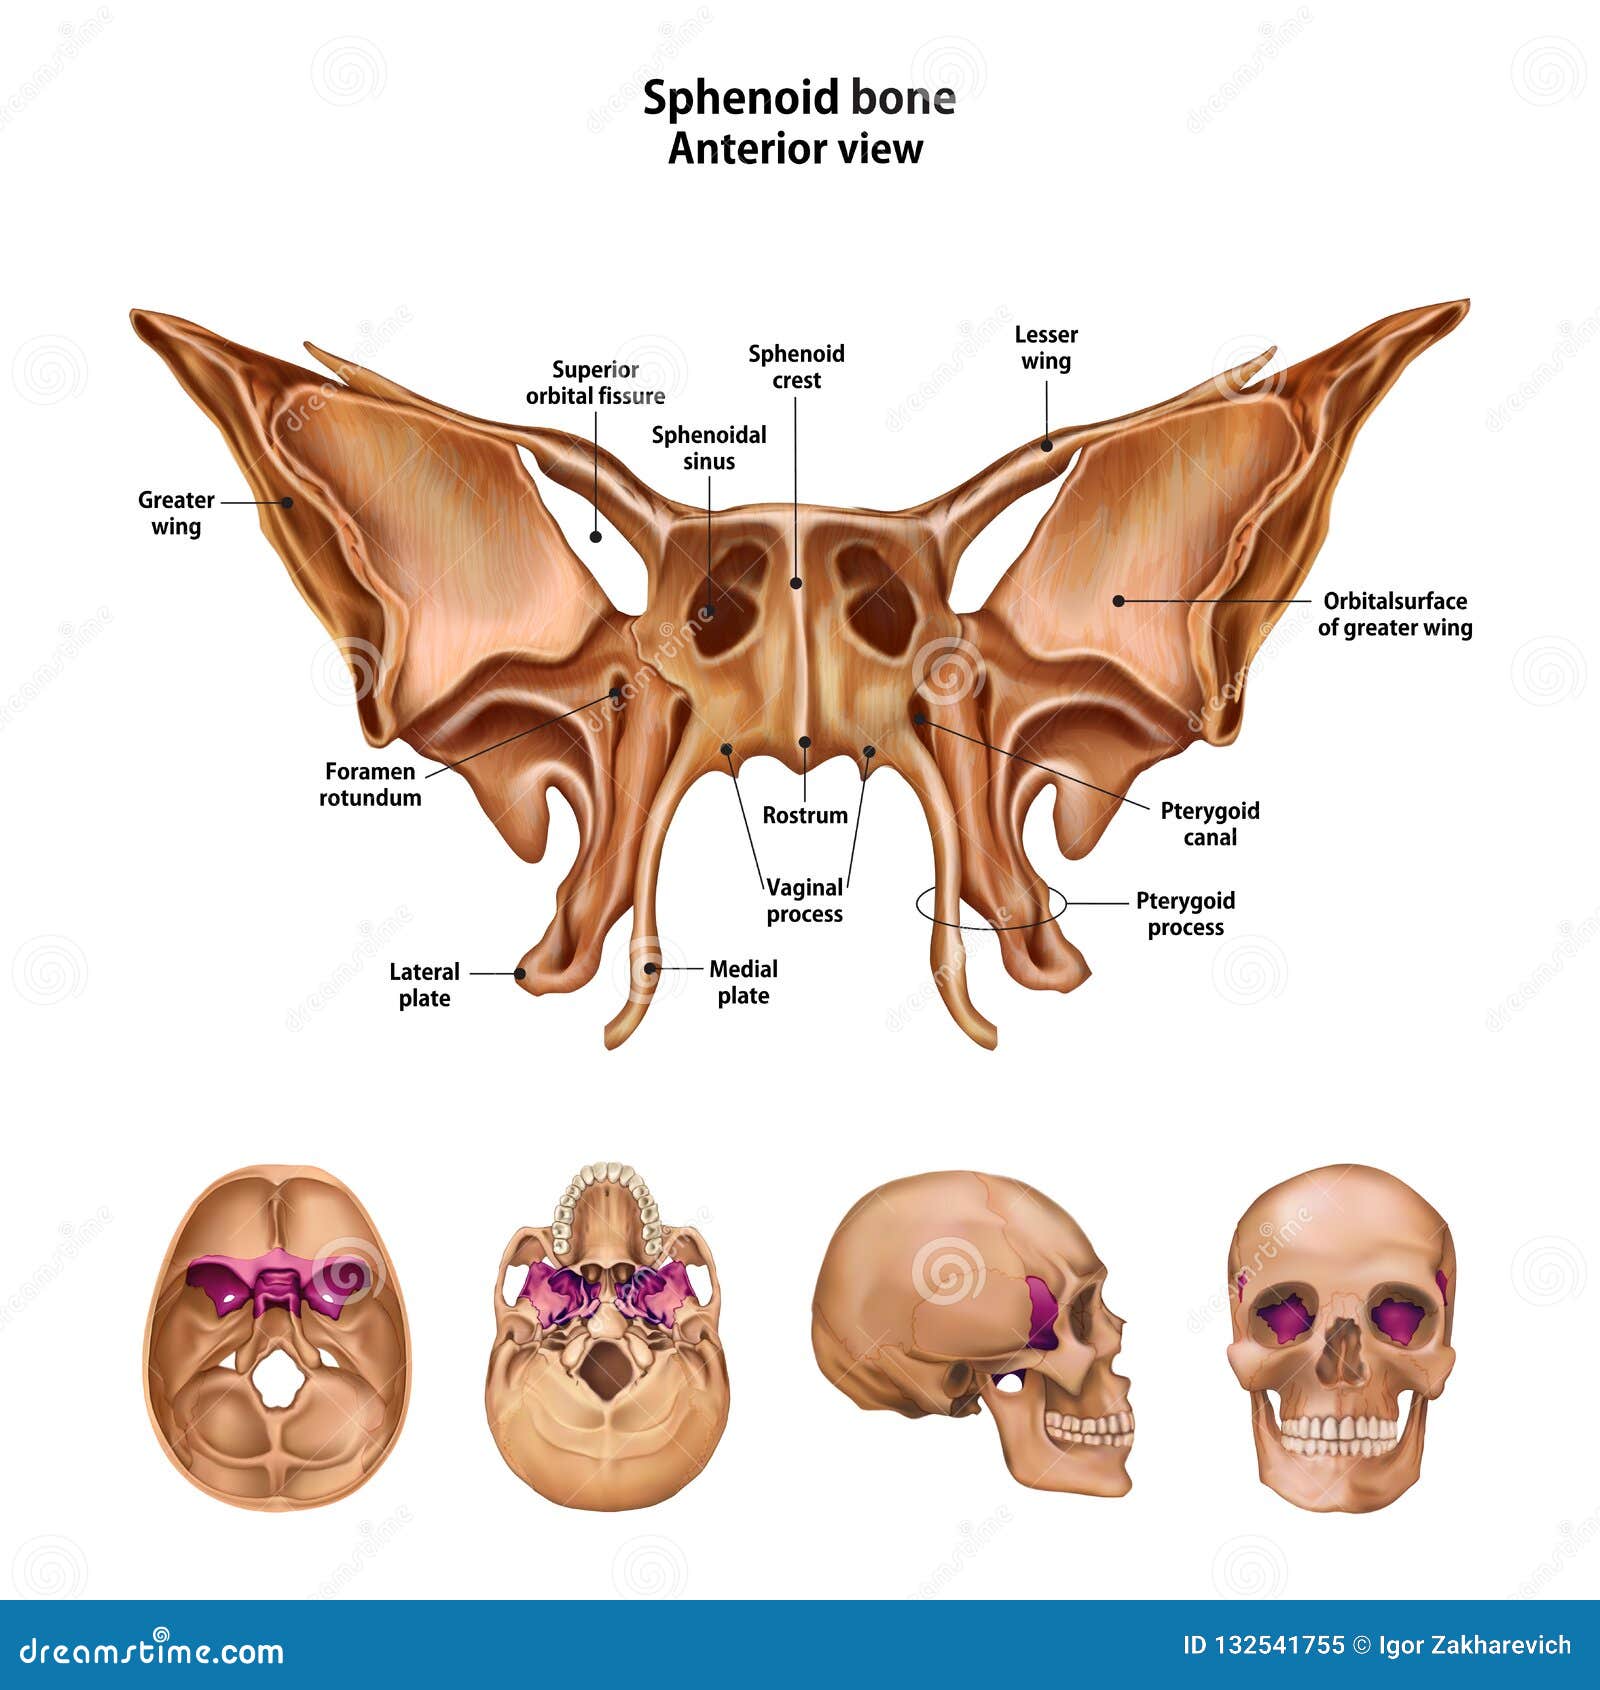 sphenoid bone. with the name and description of all sites